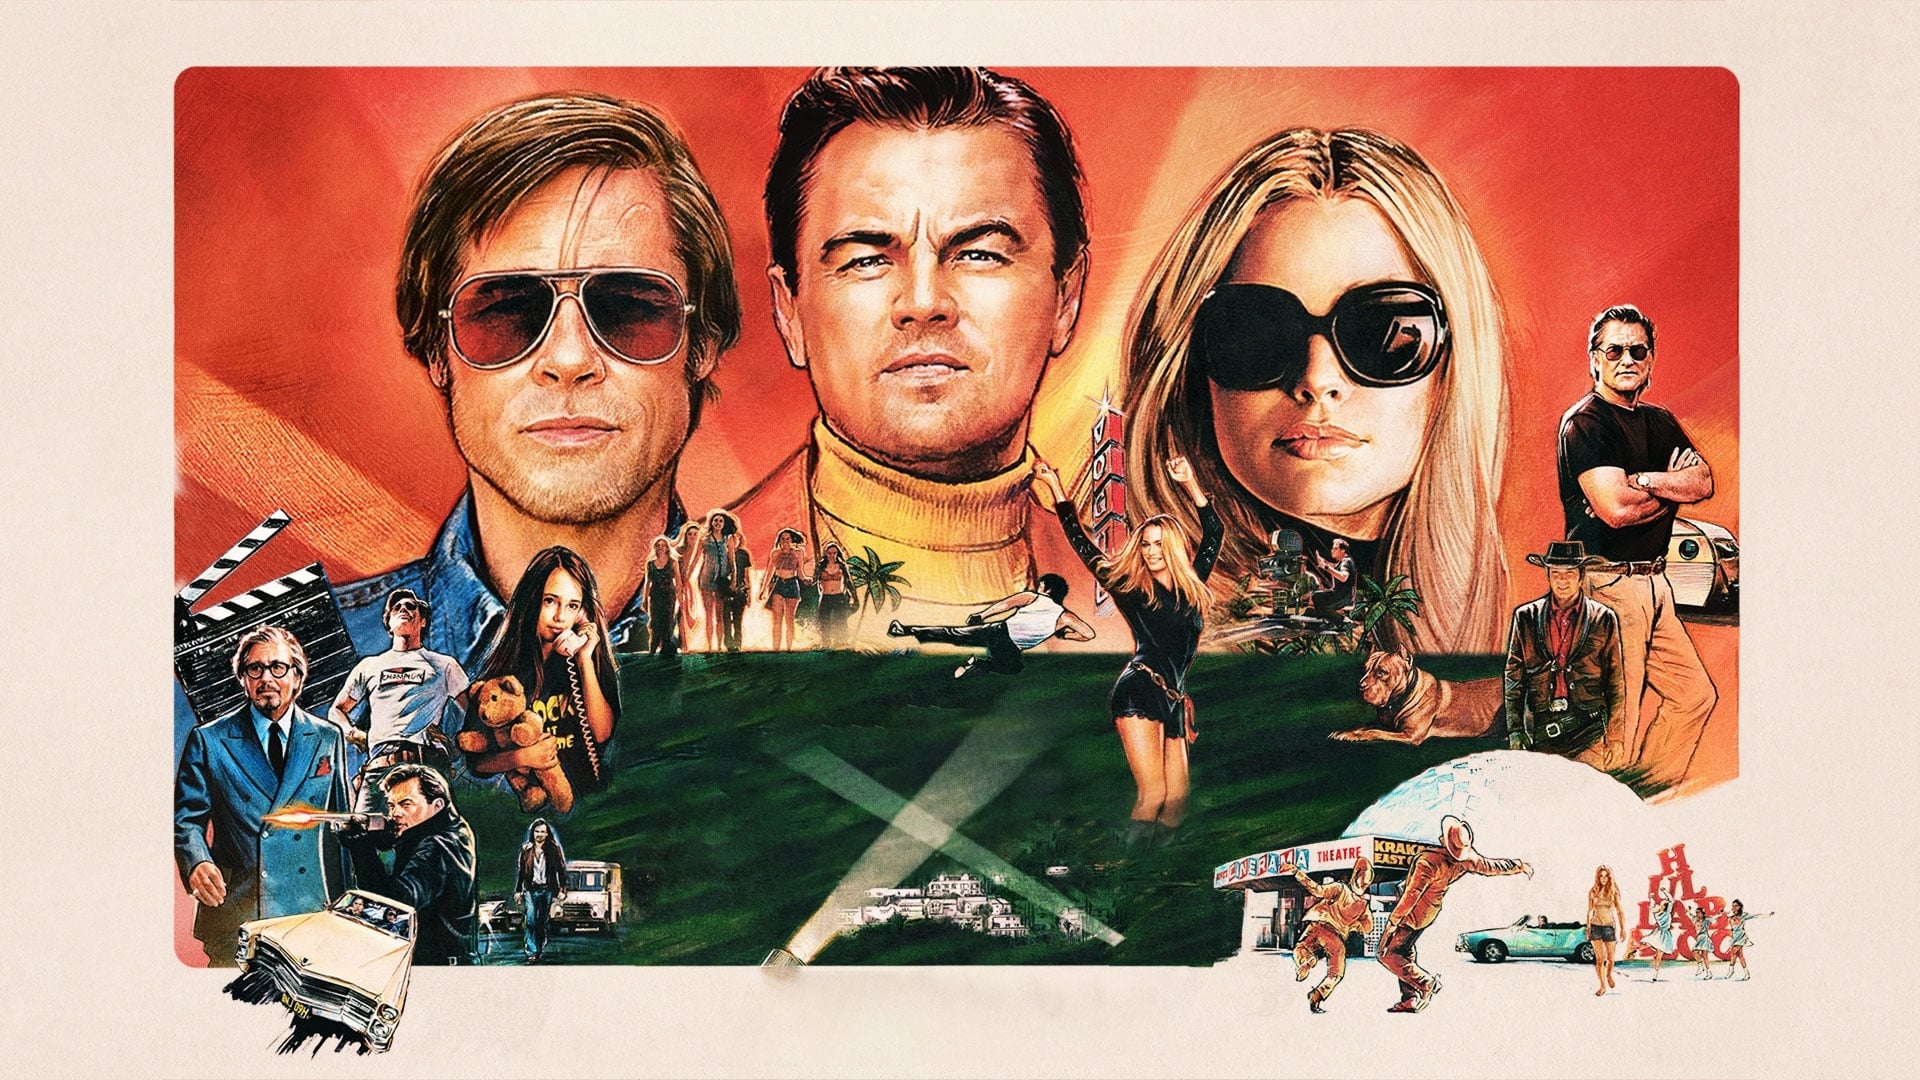 Image du film Once Upon a Time... in Hollywood aqlygzoikai6aaibaeekpiwo5ncjpg